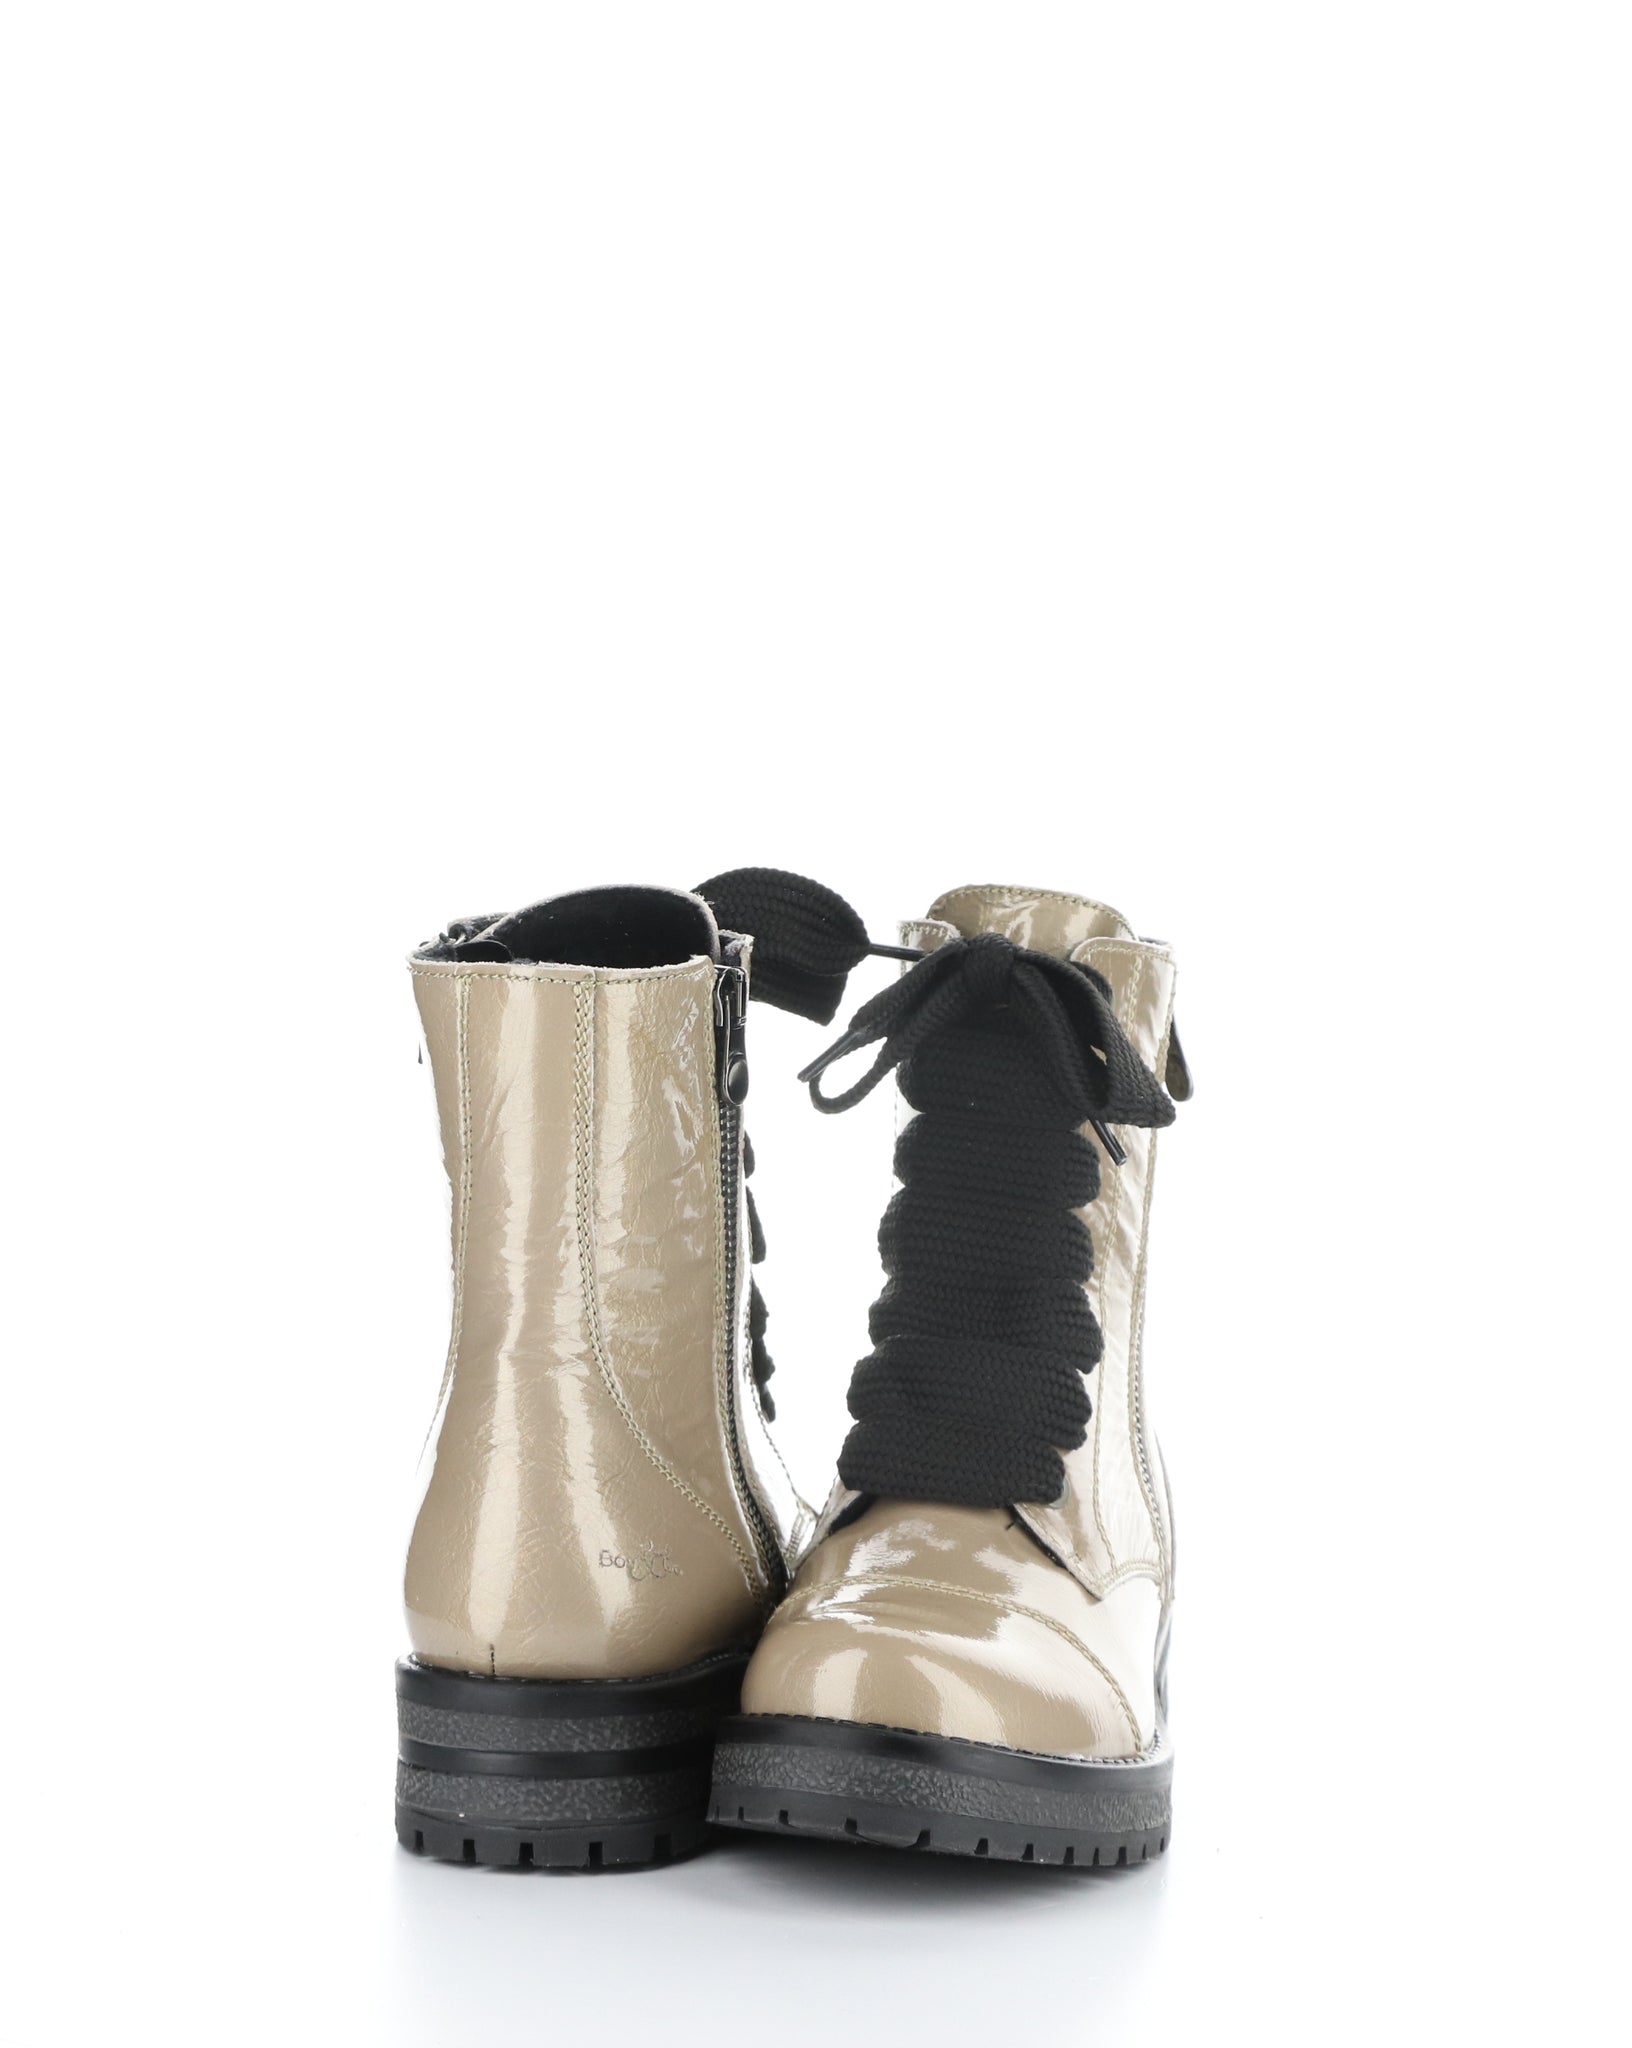 Bos&Co. "Paulie" Taupe Patent - Waterproof Boot